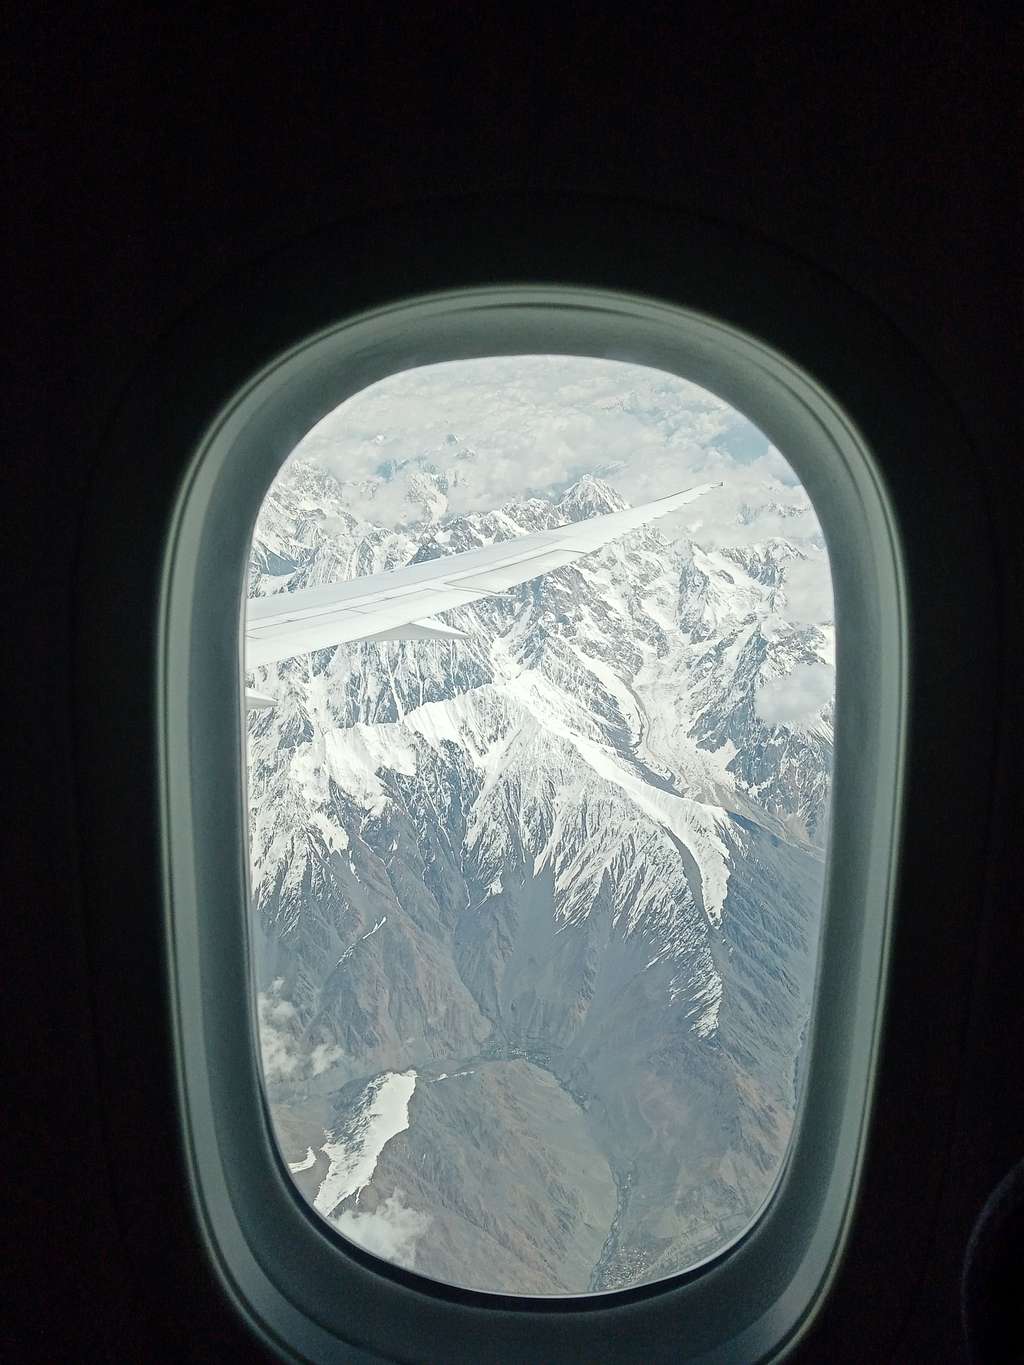 Aerial view of Trich Mir and Hindukush Mountains